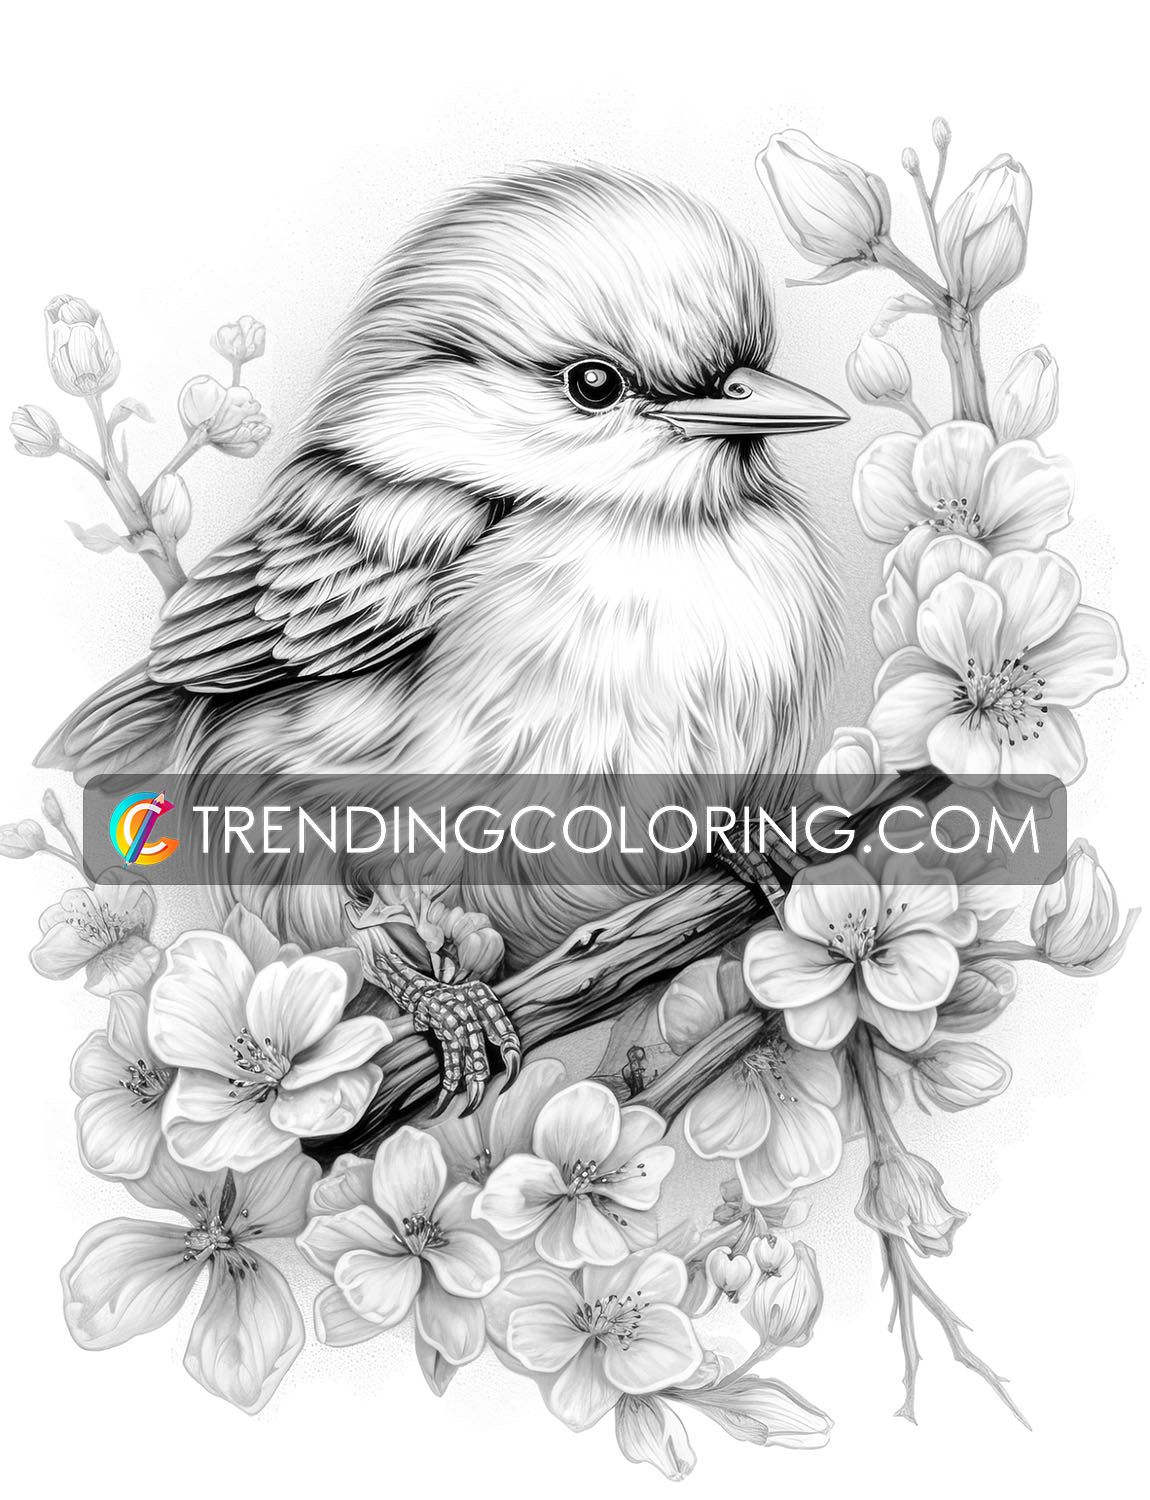 25 Baby Cute Animal Grayscale Coloring Pages - Instant Download - Printable PDF